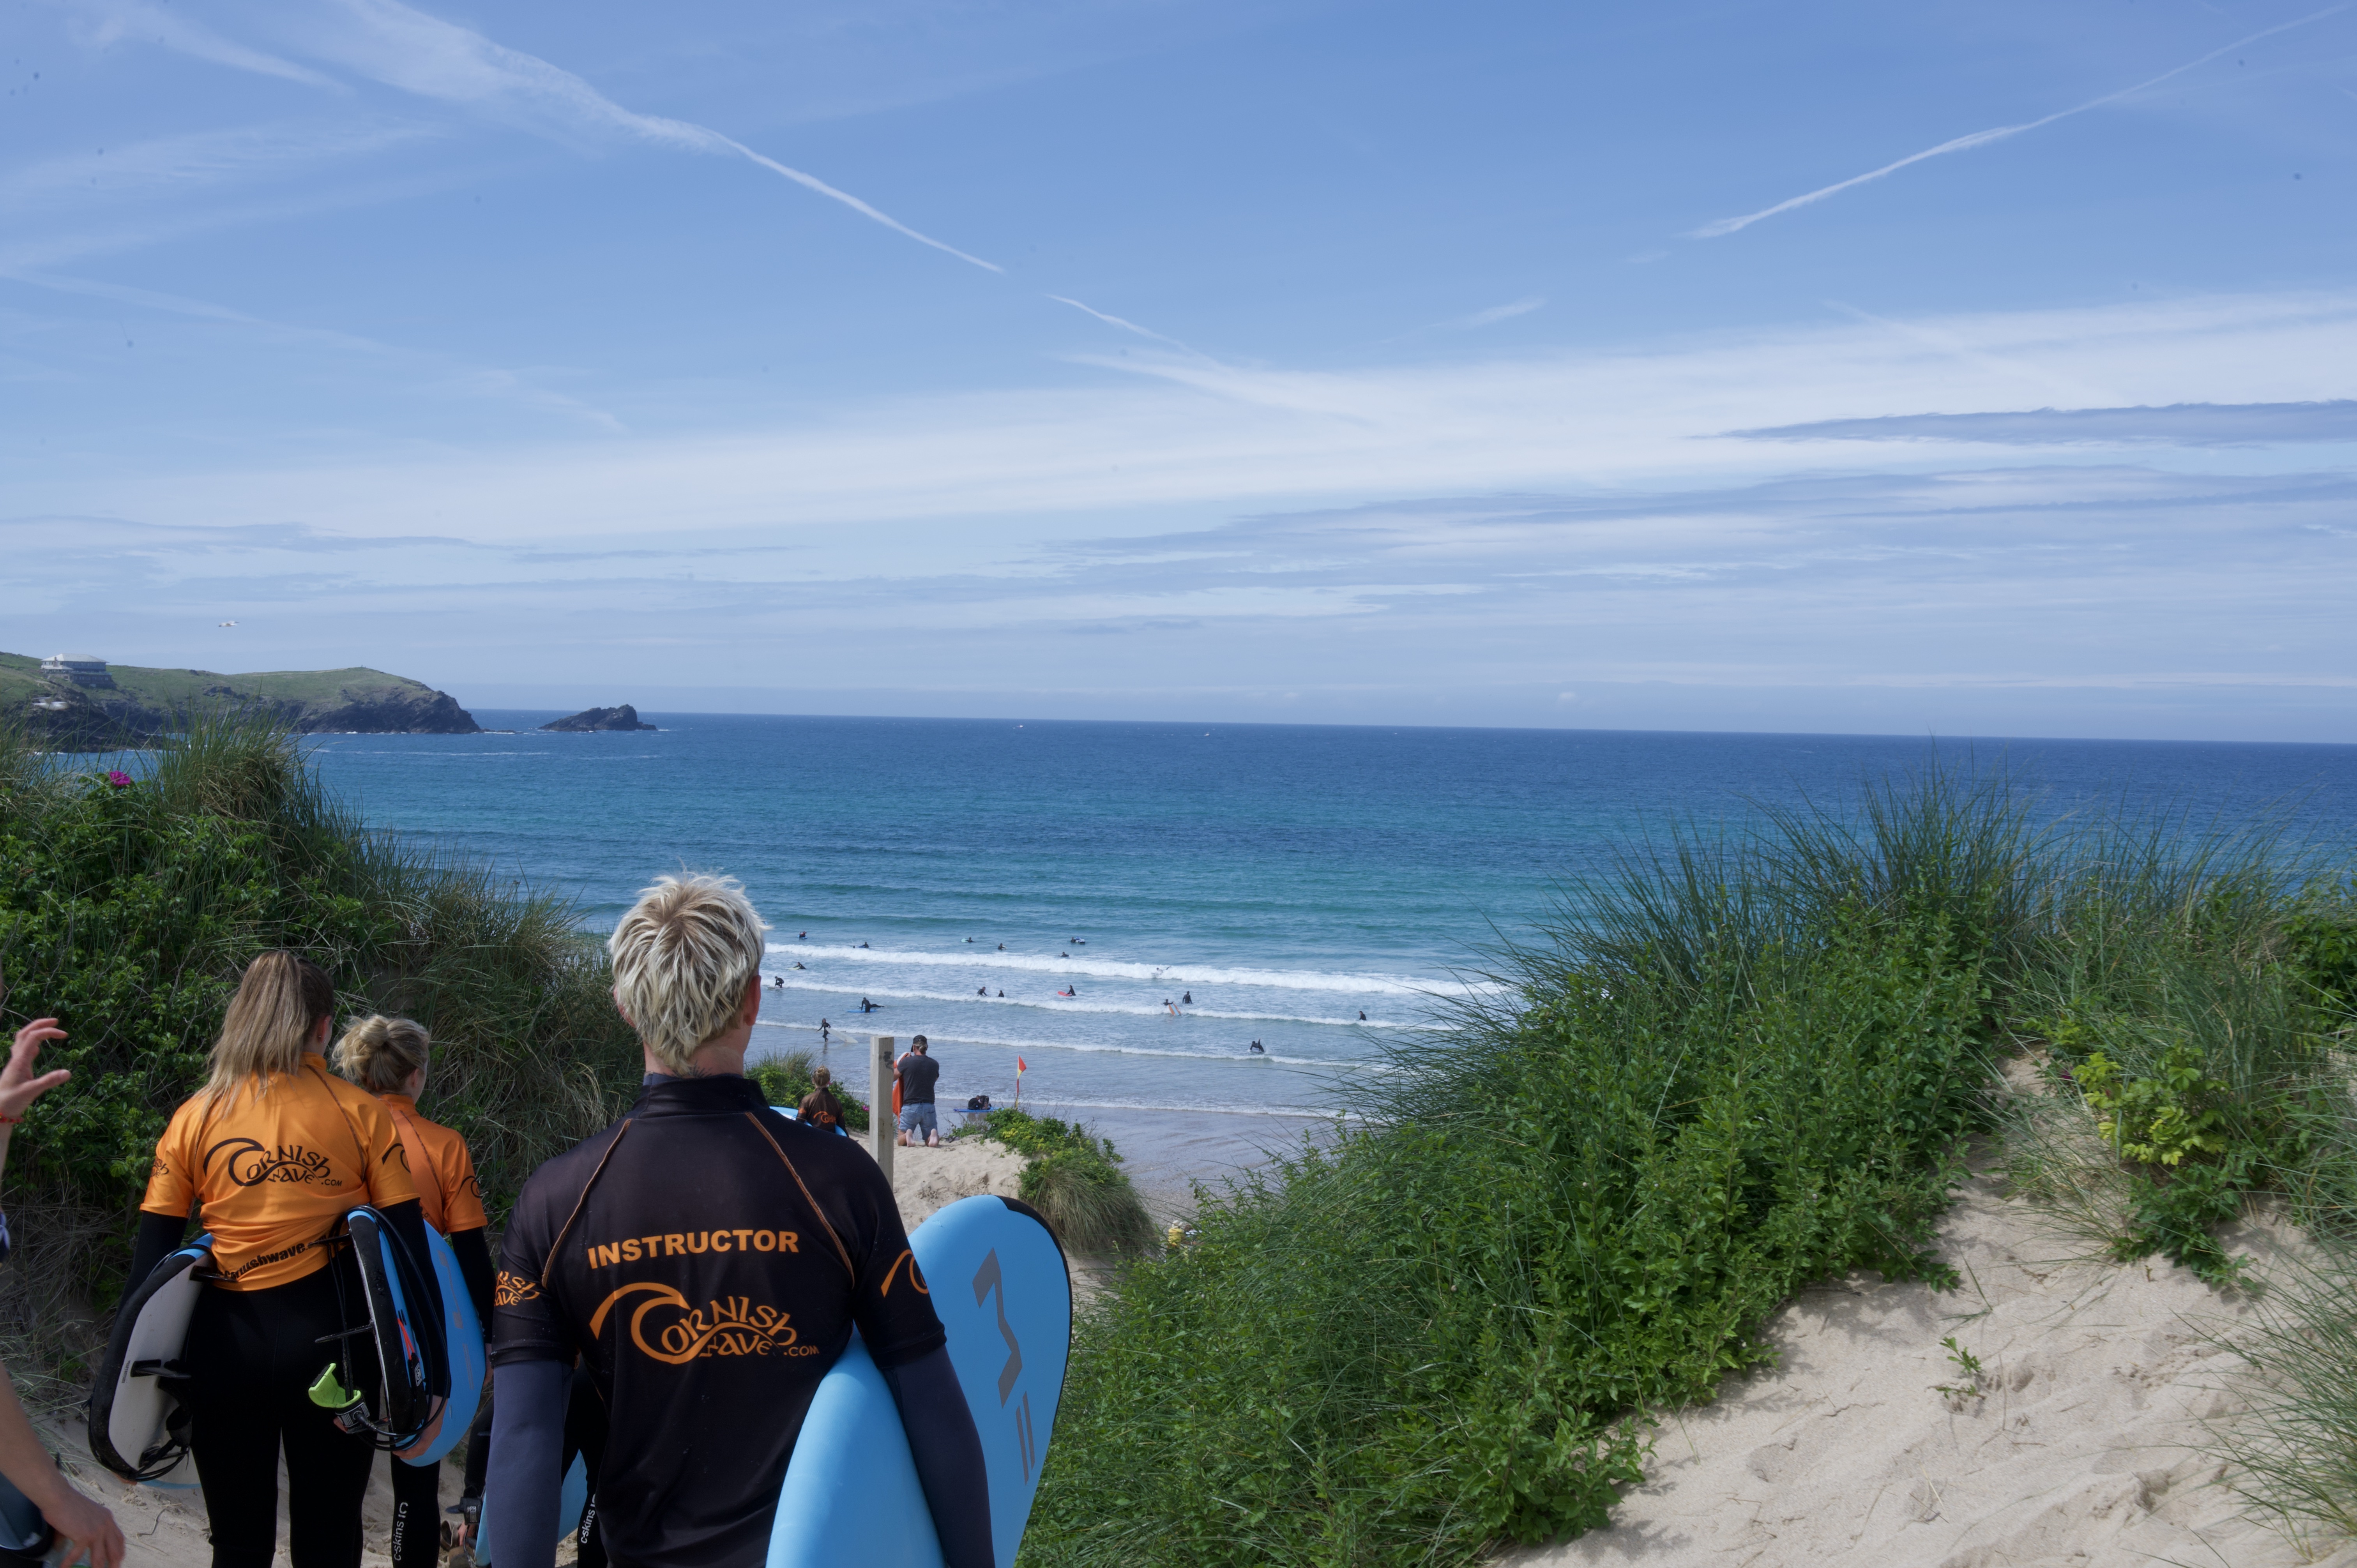 Surf Lesson in Cornwall
